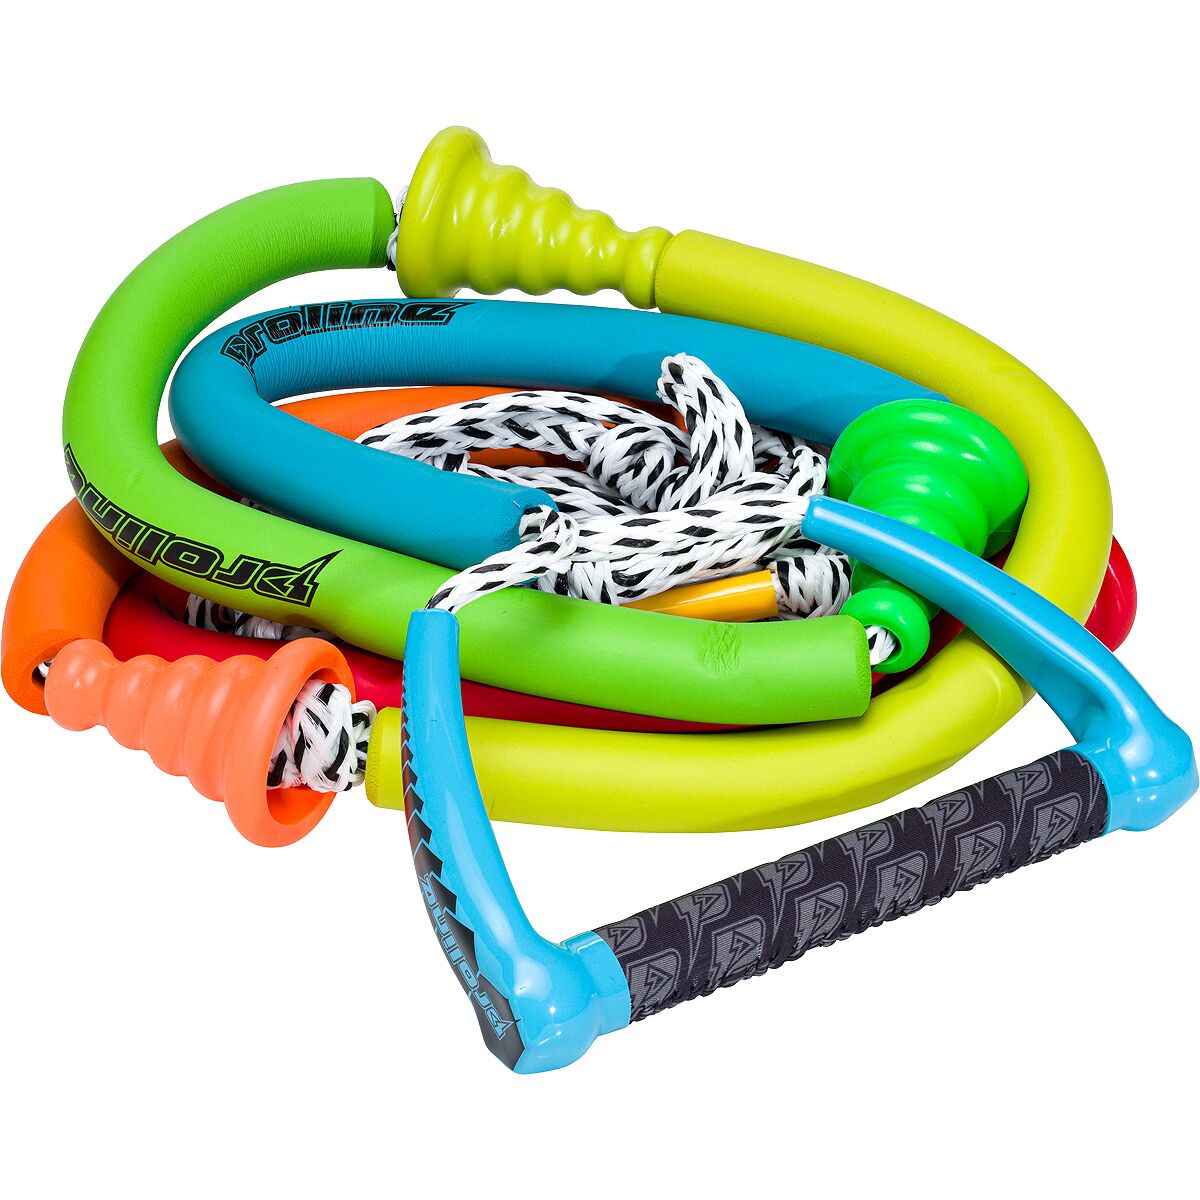 Connelly Skis Tug Surf Tow Rope